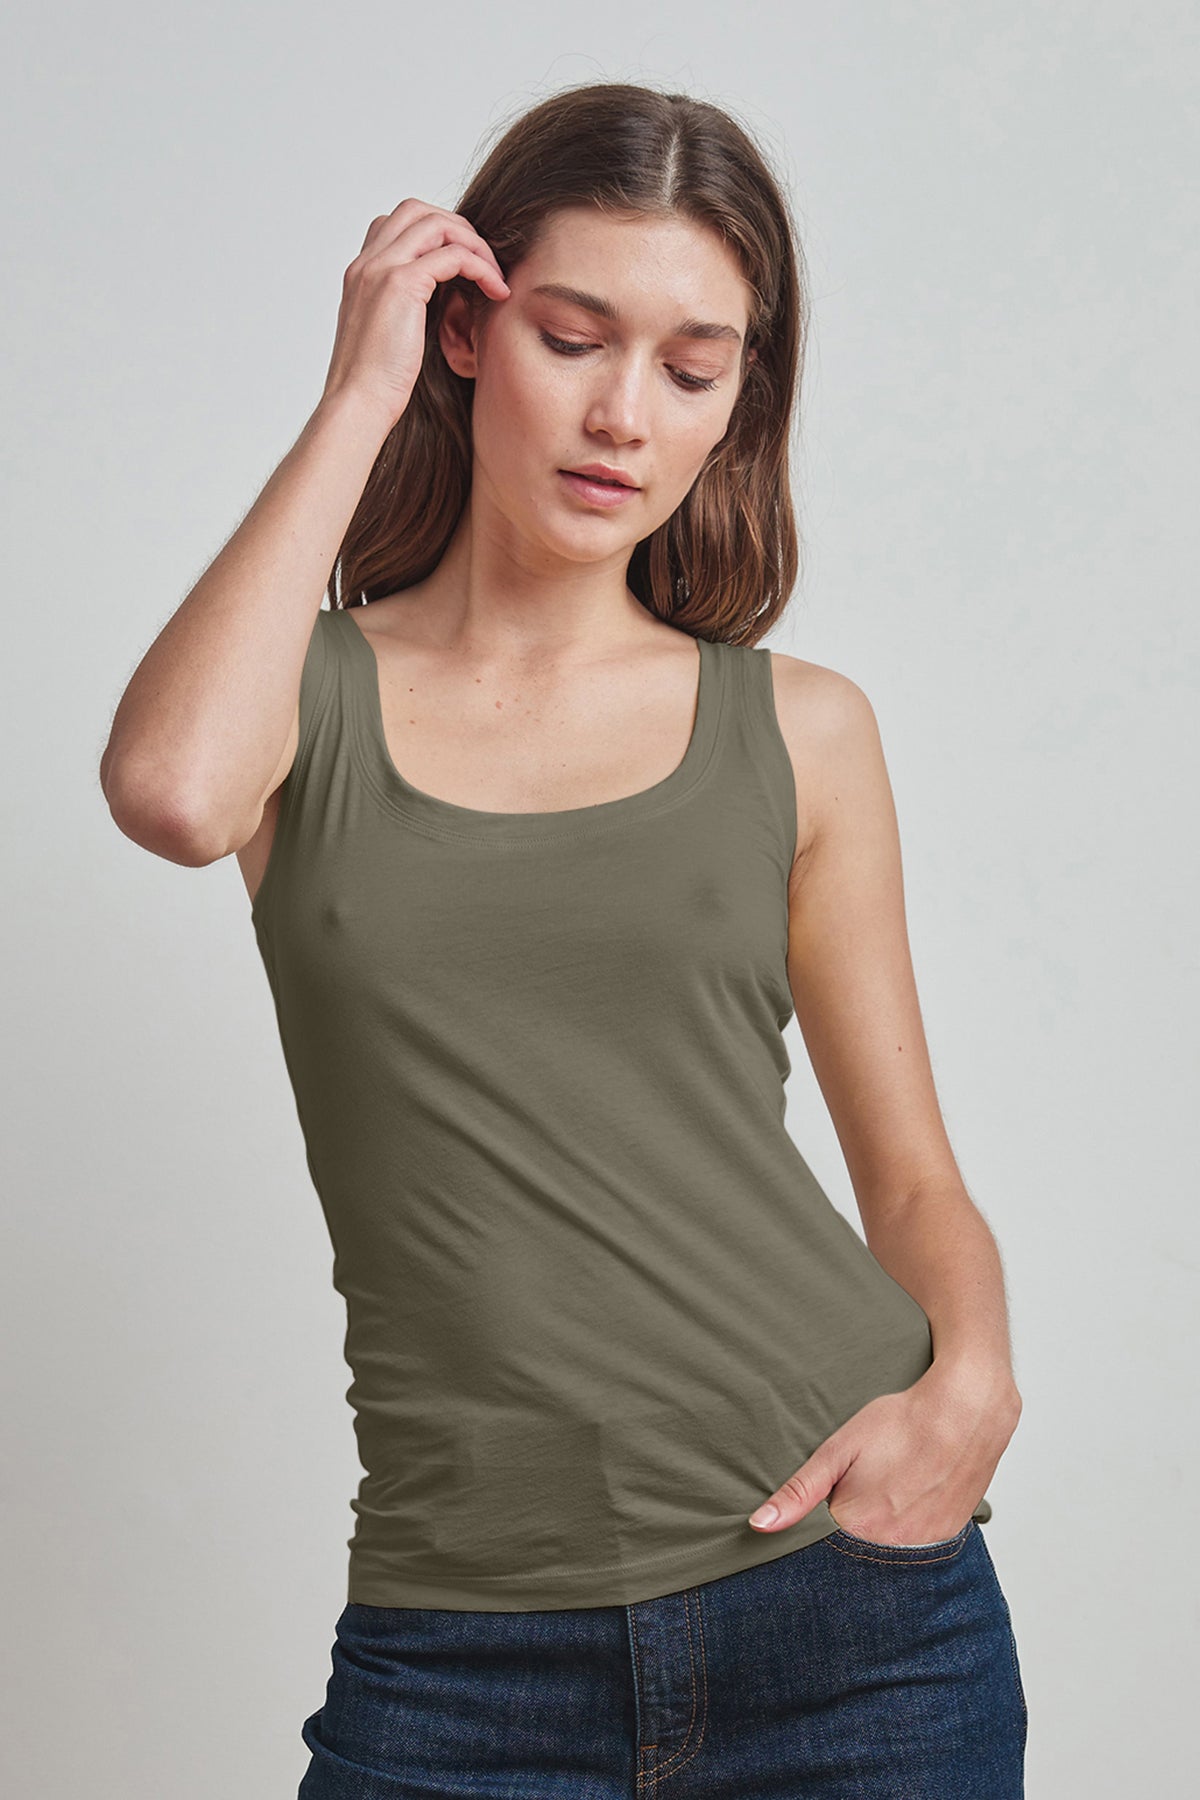   A woman wearing a Velvet by Graham & Spencer MOSSY GAUZY WHISPER FITTED TANK in olive green, perfect for warmer days and layering. 